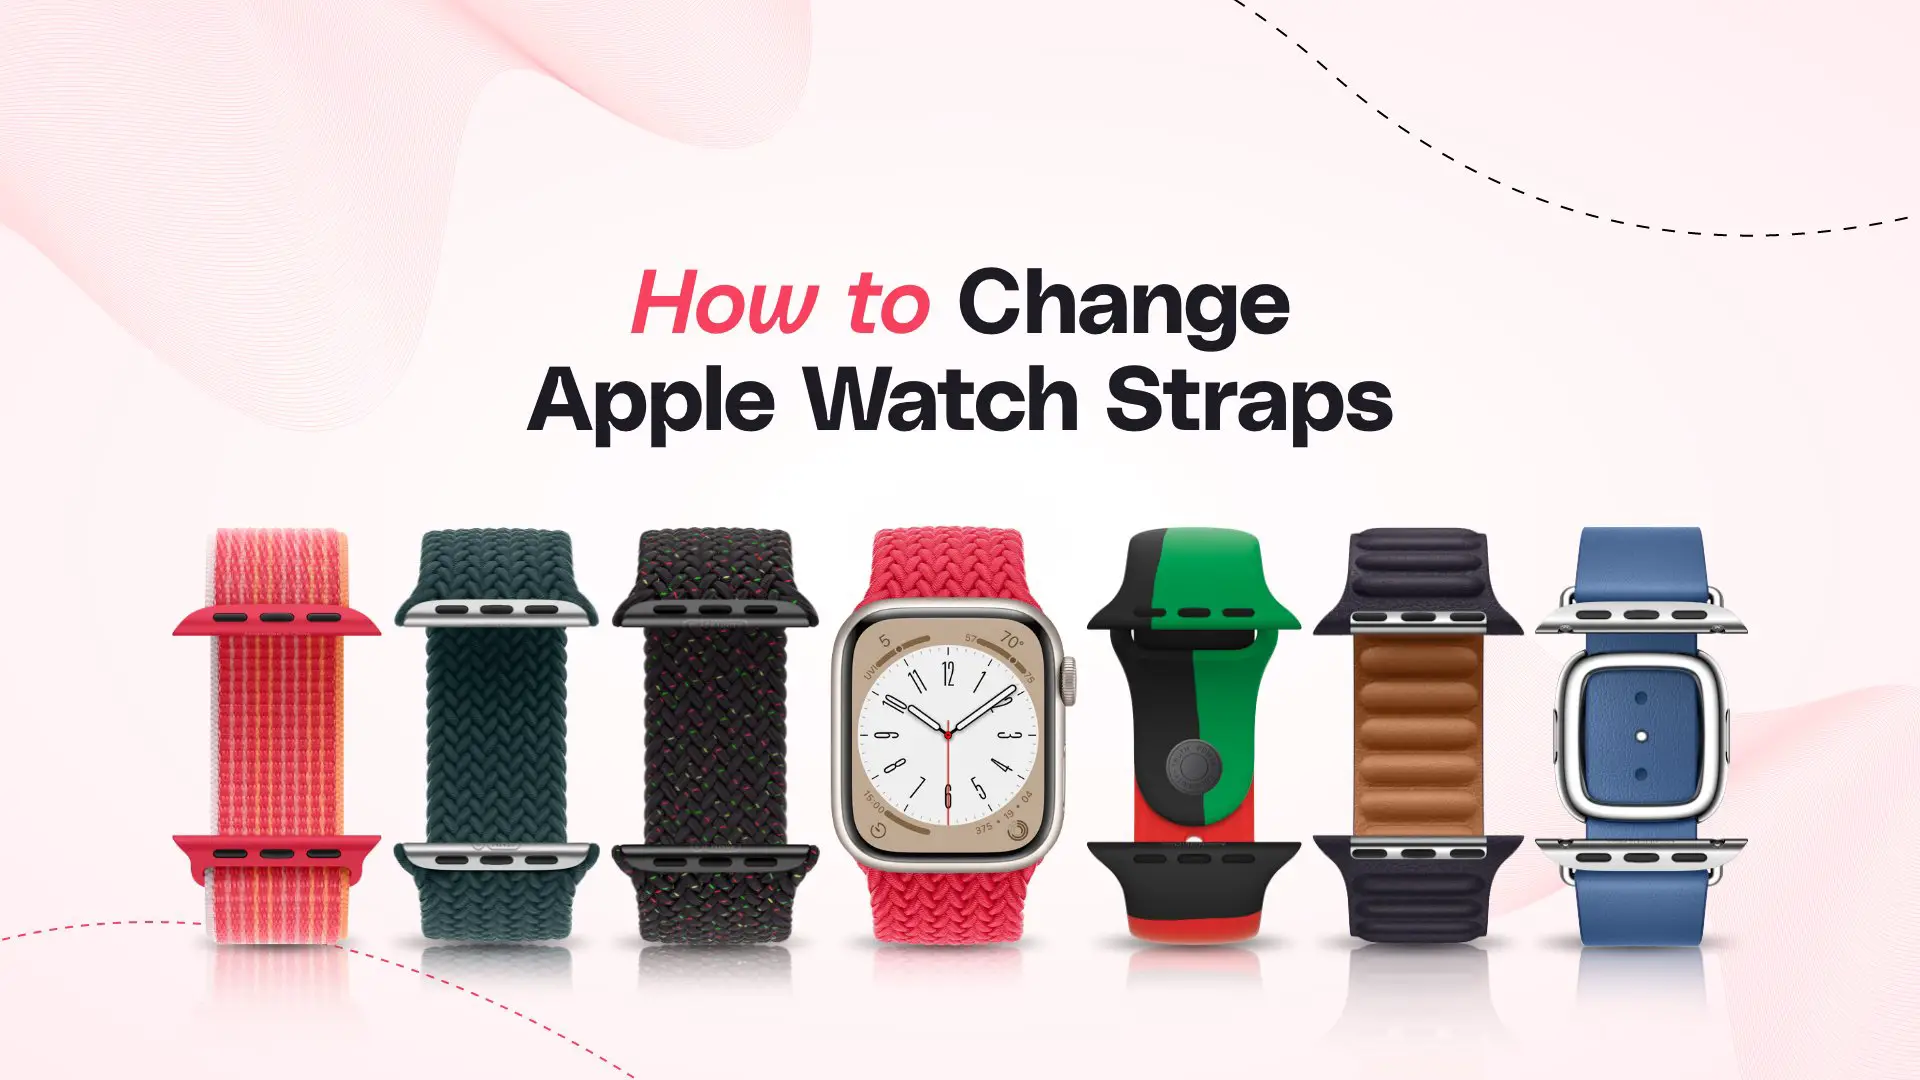 How to Change Apple Watch Straps